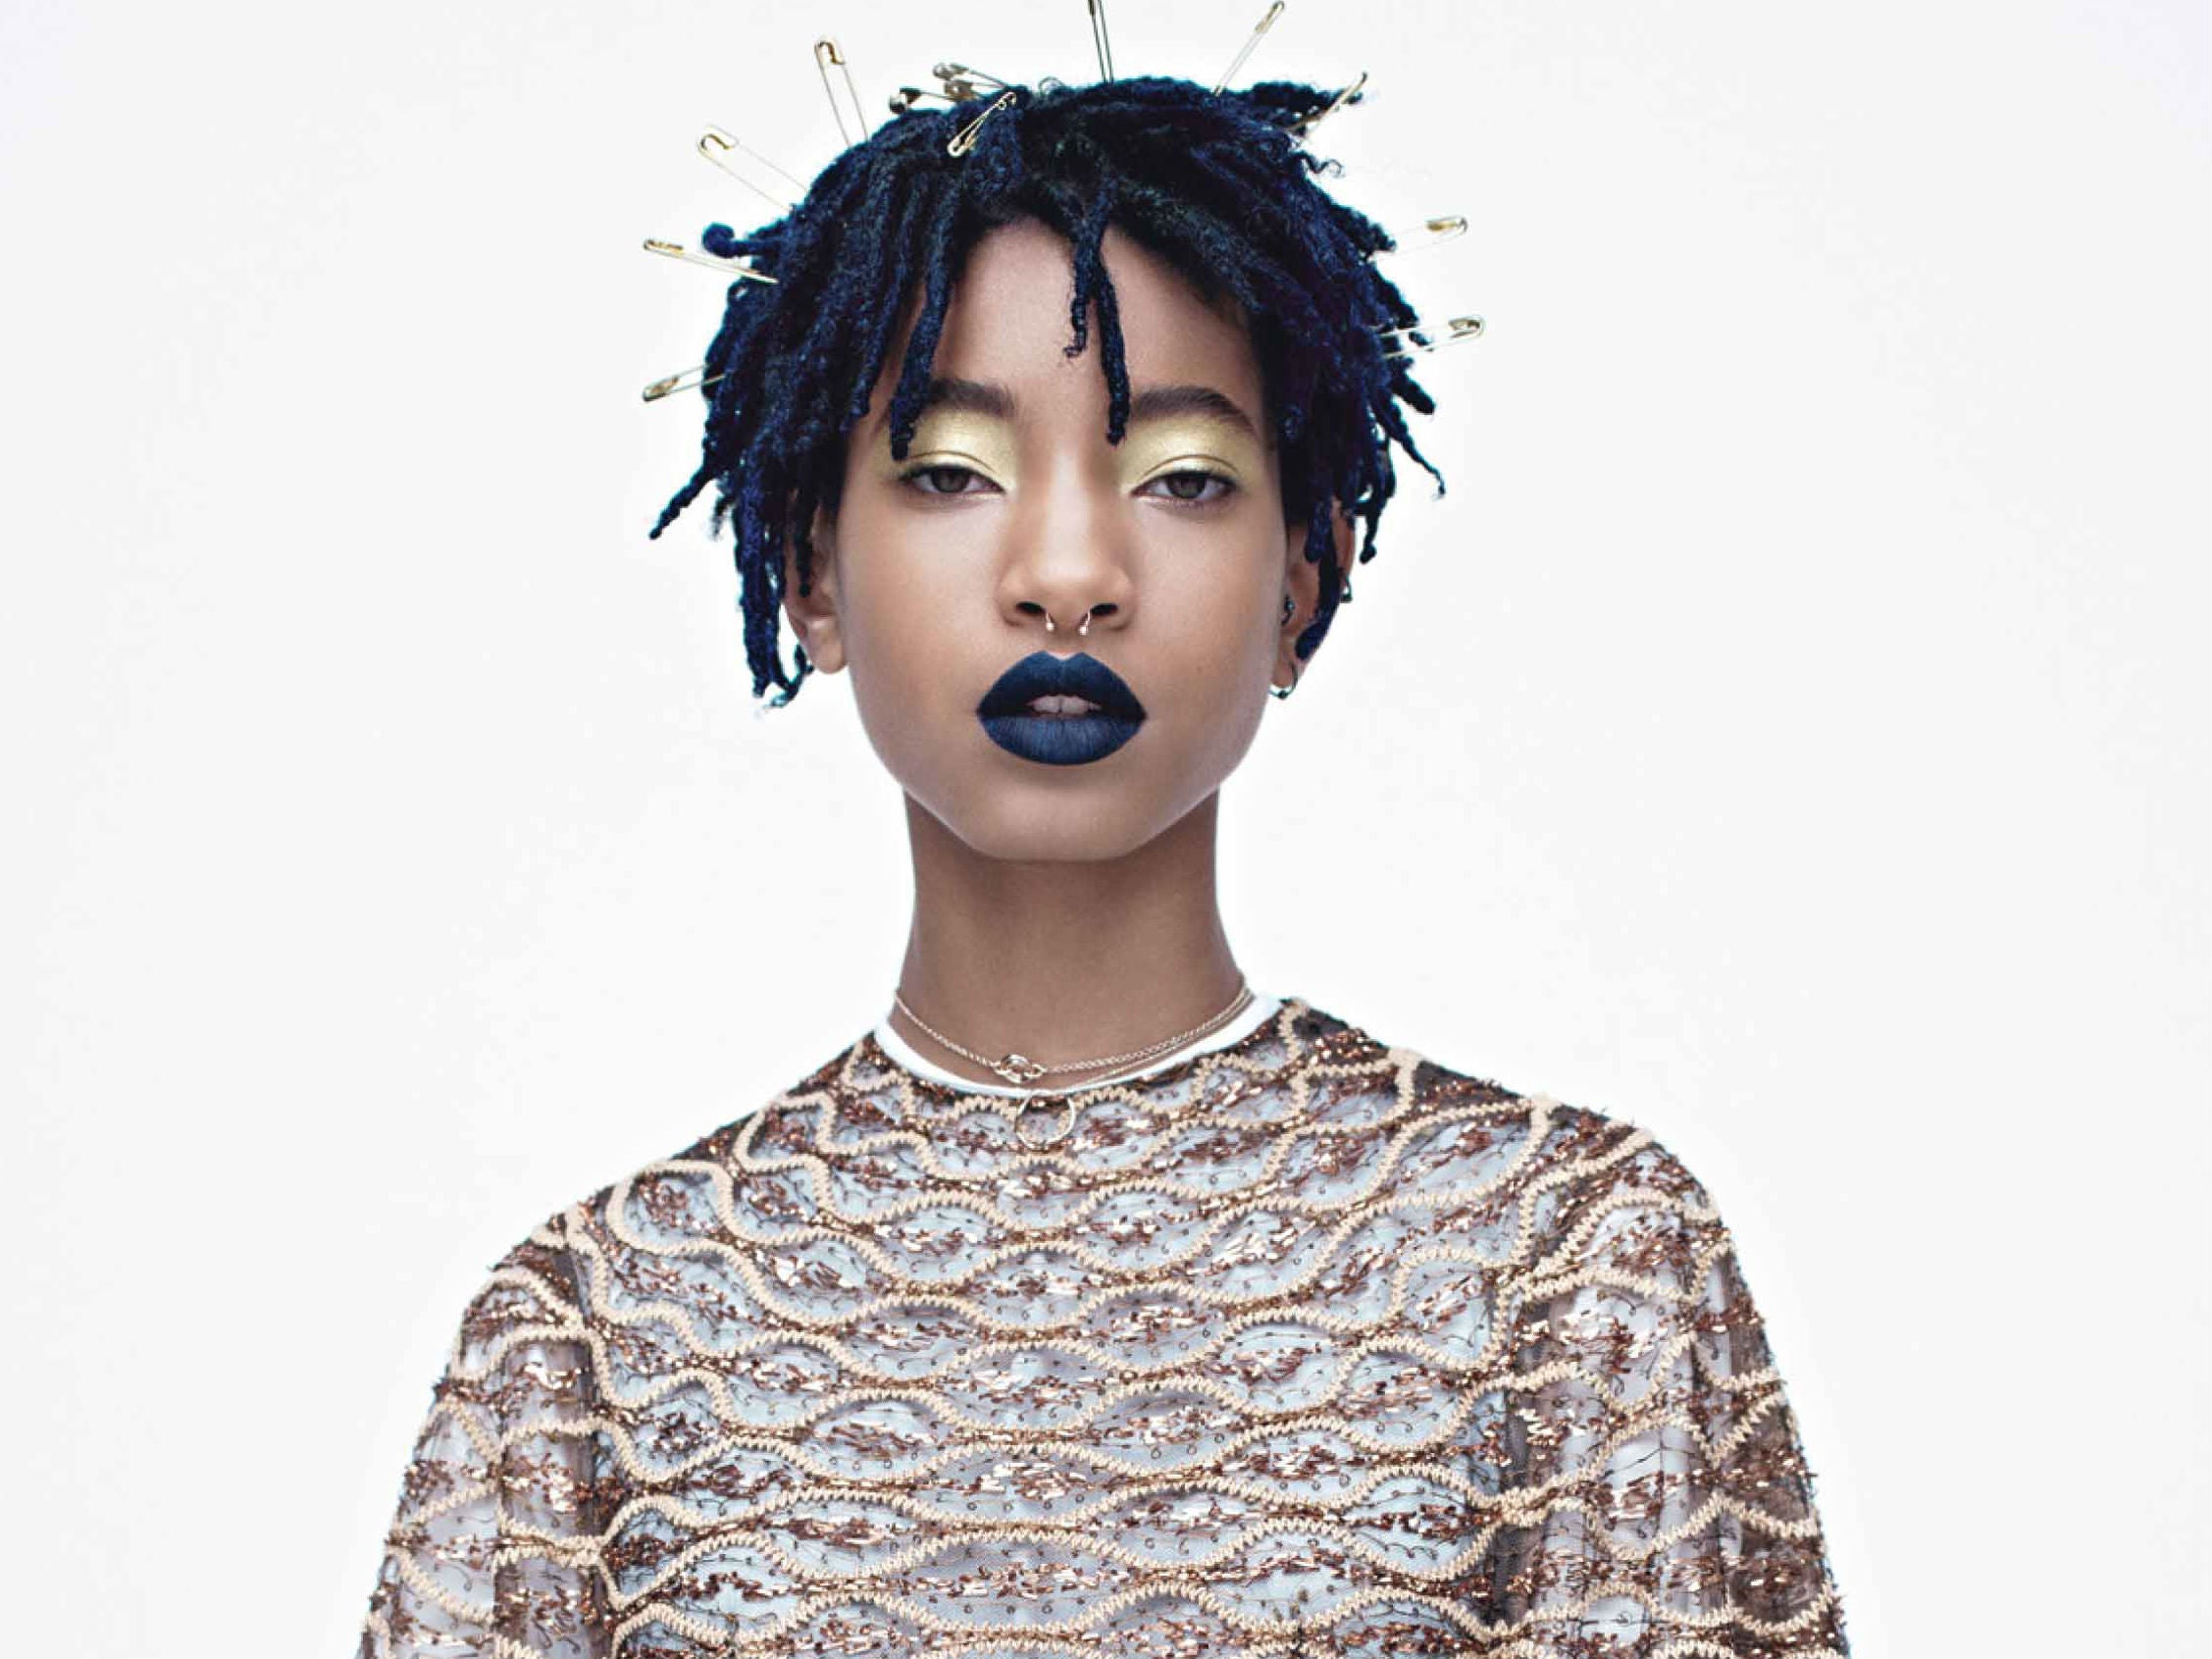 Willow Smith sporting navy blue hair and matching lips for W magazine's fashion shoot.